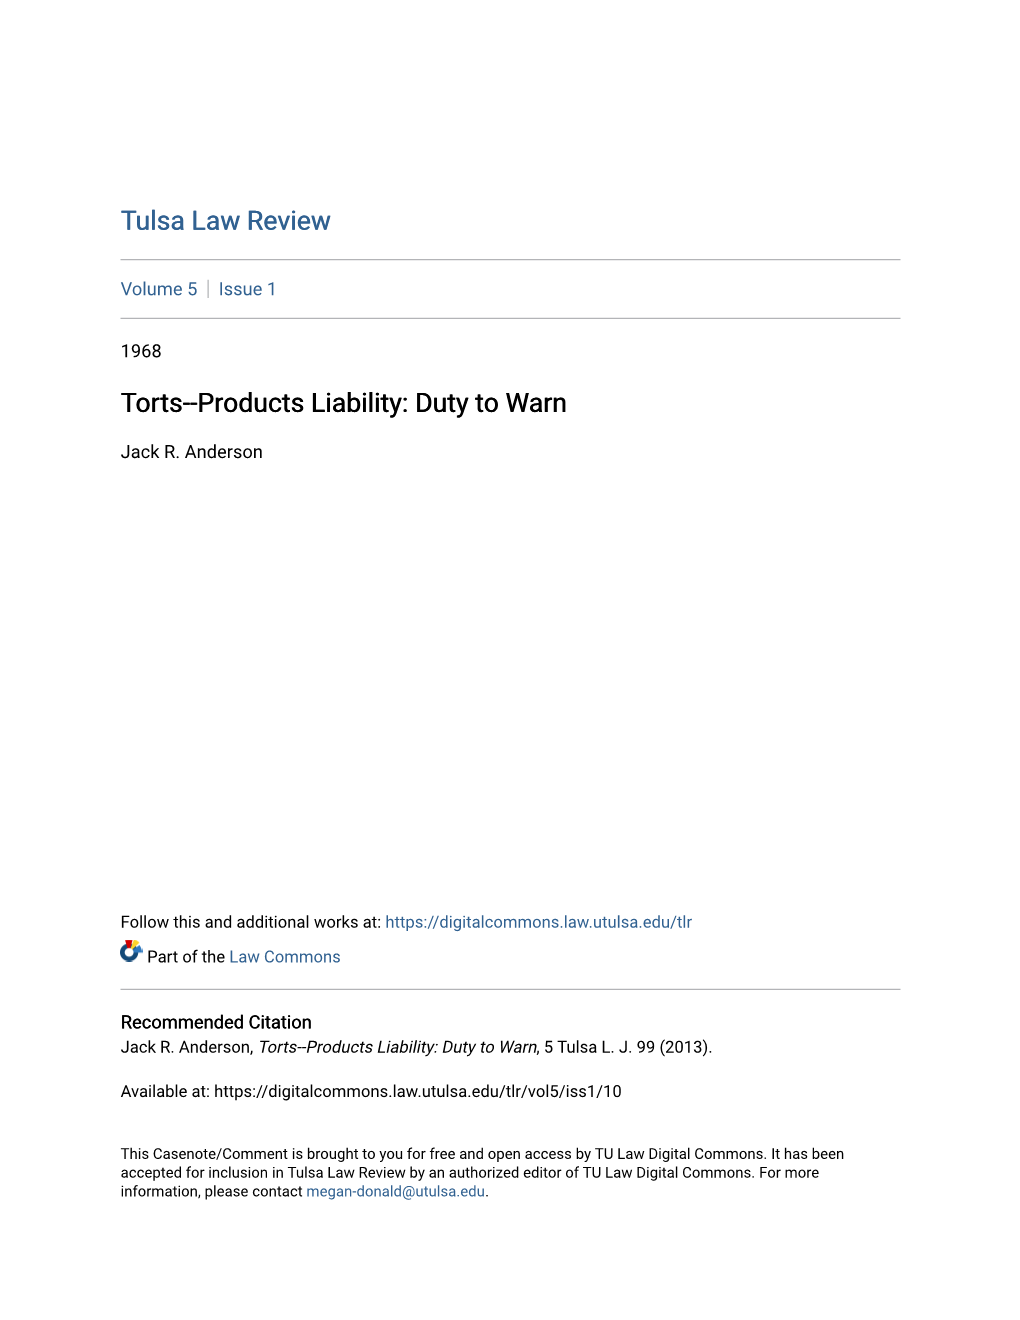 Torts--Products Liability: Duty to Warn